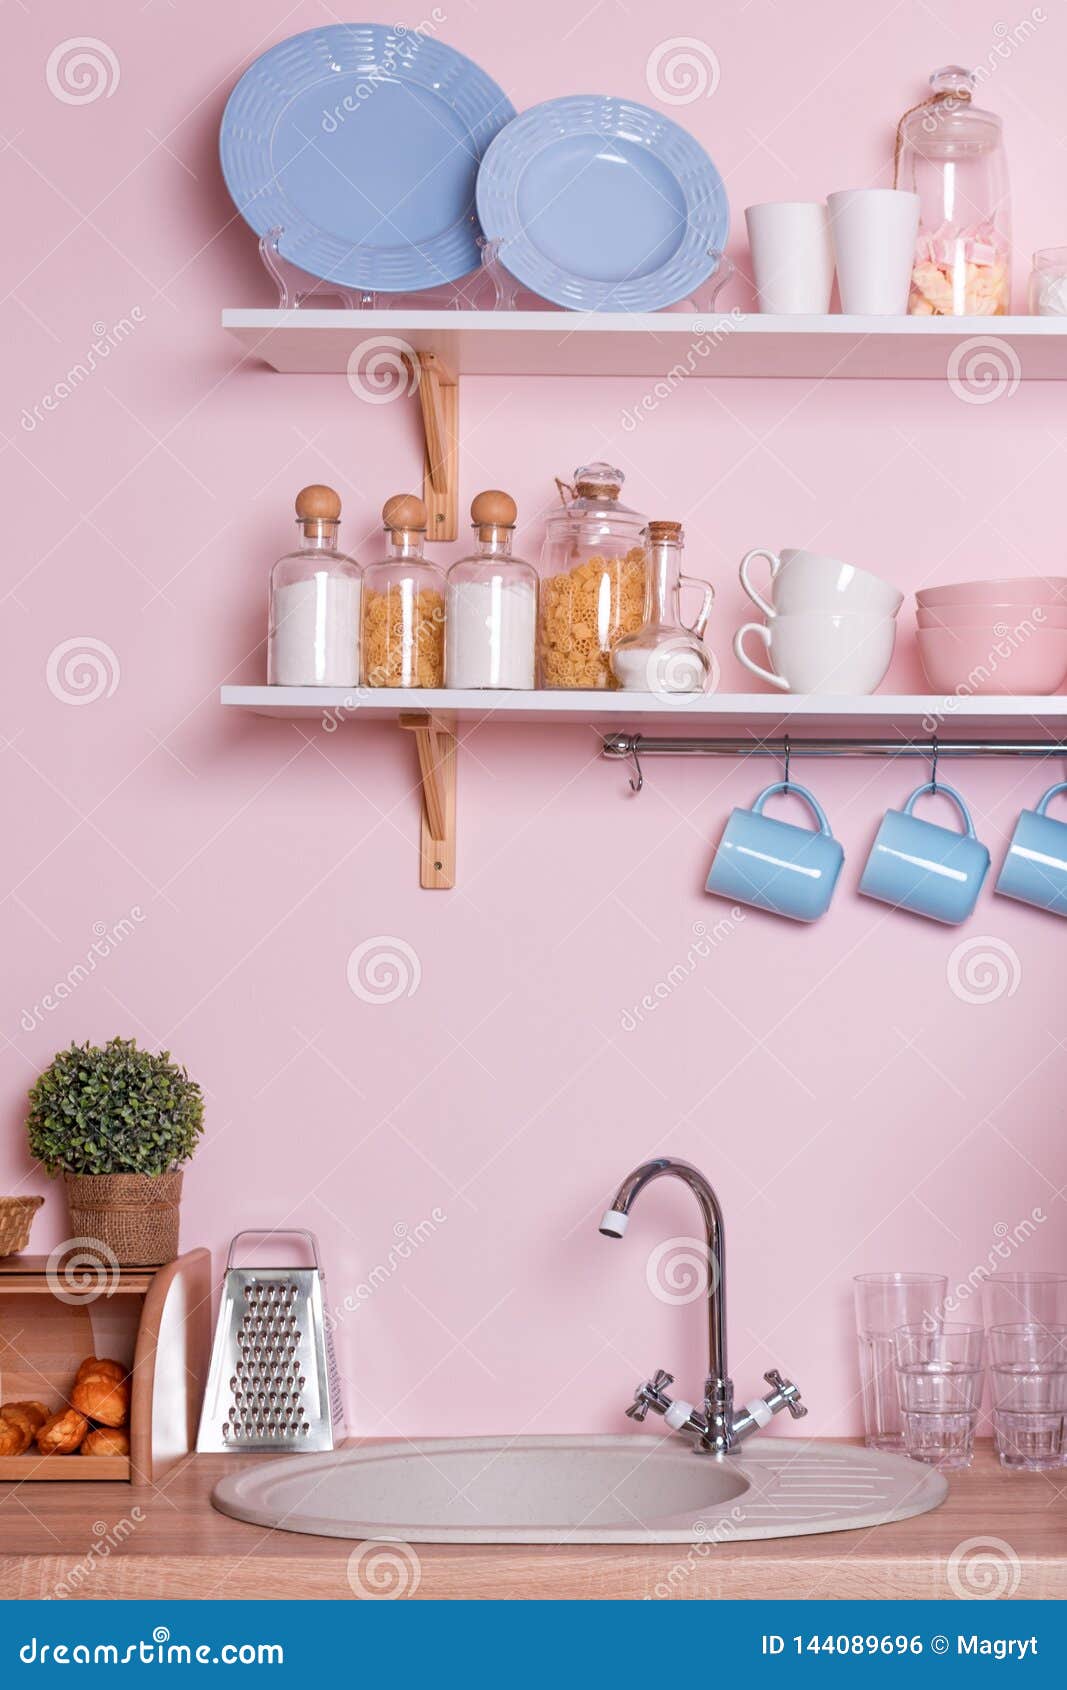 https://thumbs.dreamstime.com/z/pink-blue-pastel-modern-kitchen-interior-accessories-containers-cereals-dishes-hanging-cups-144089696.jpg